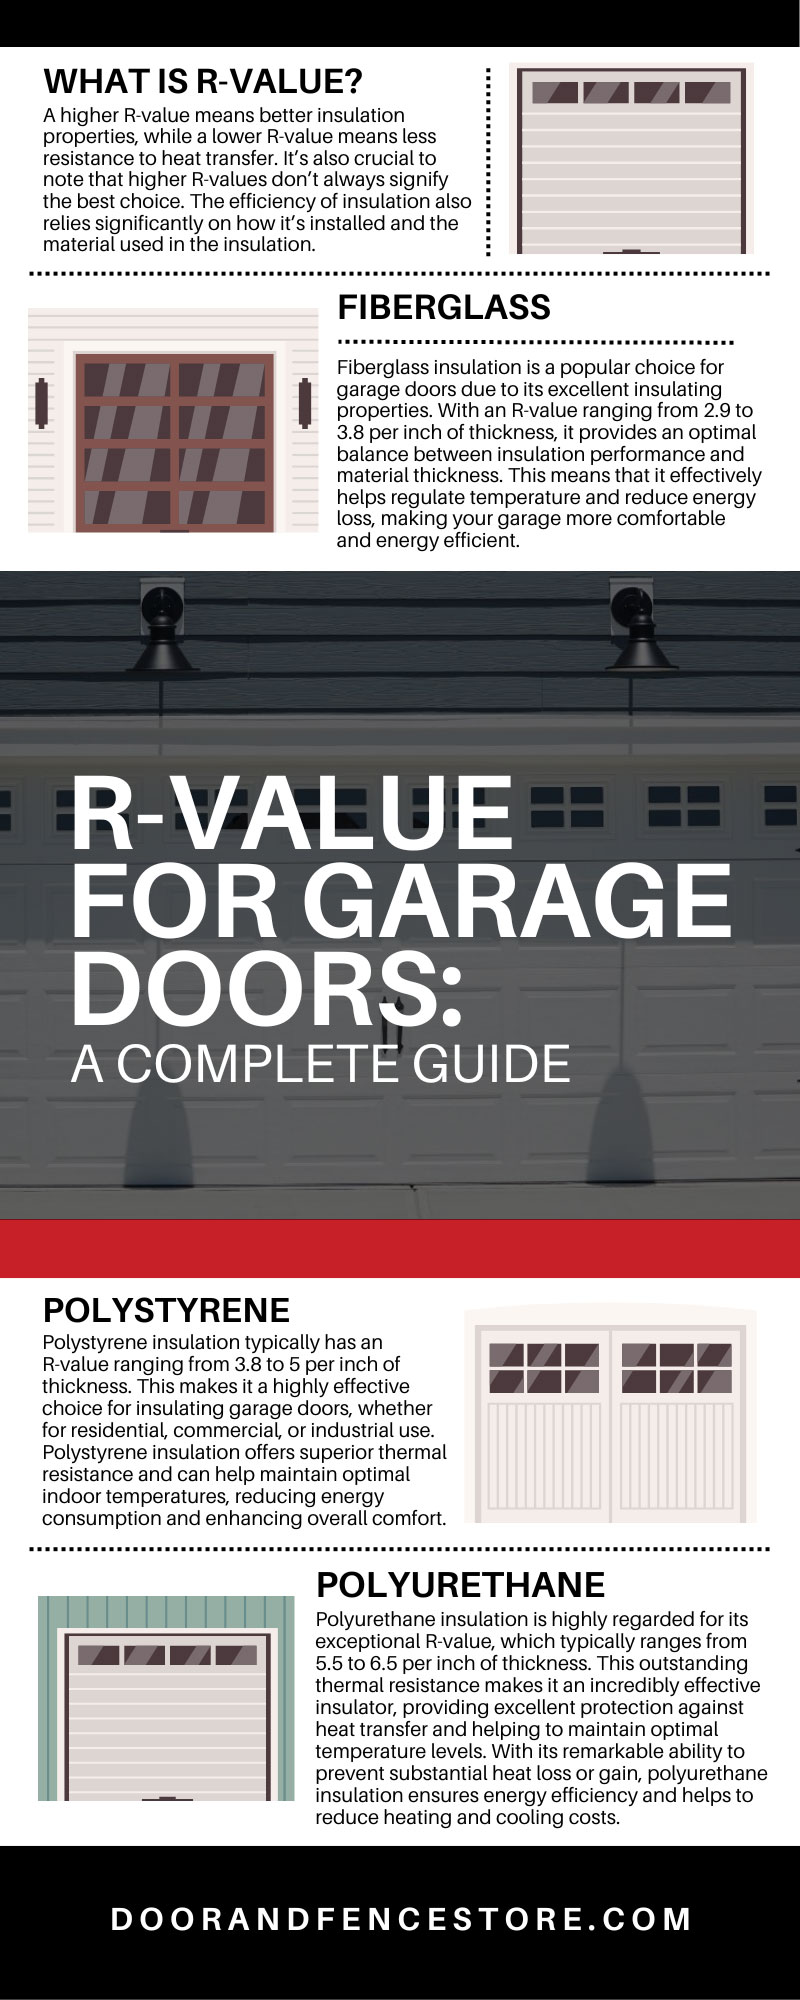 R-Value for Garage Doors: A Complete Guide
